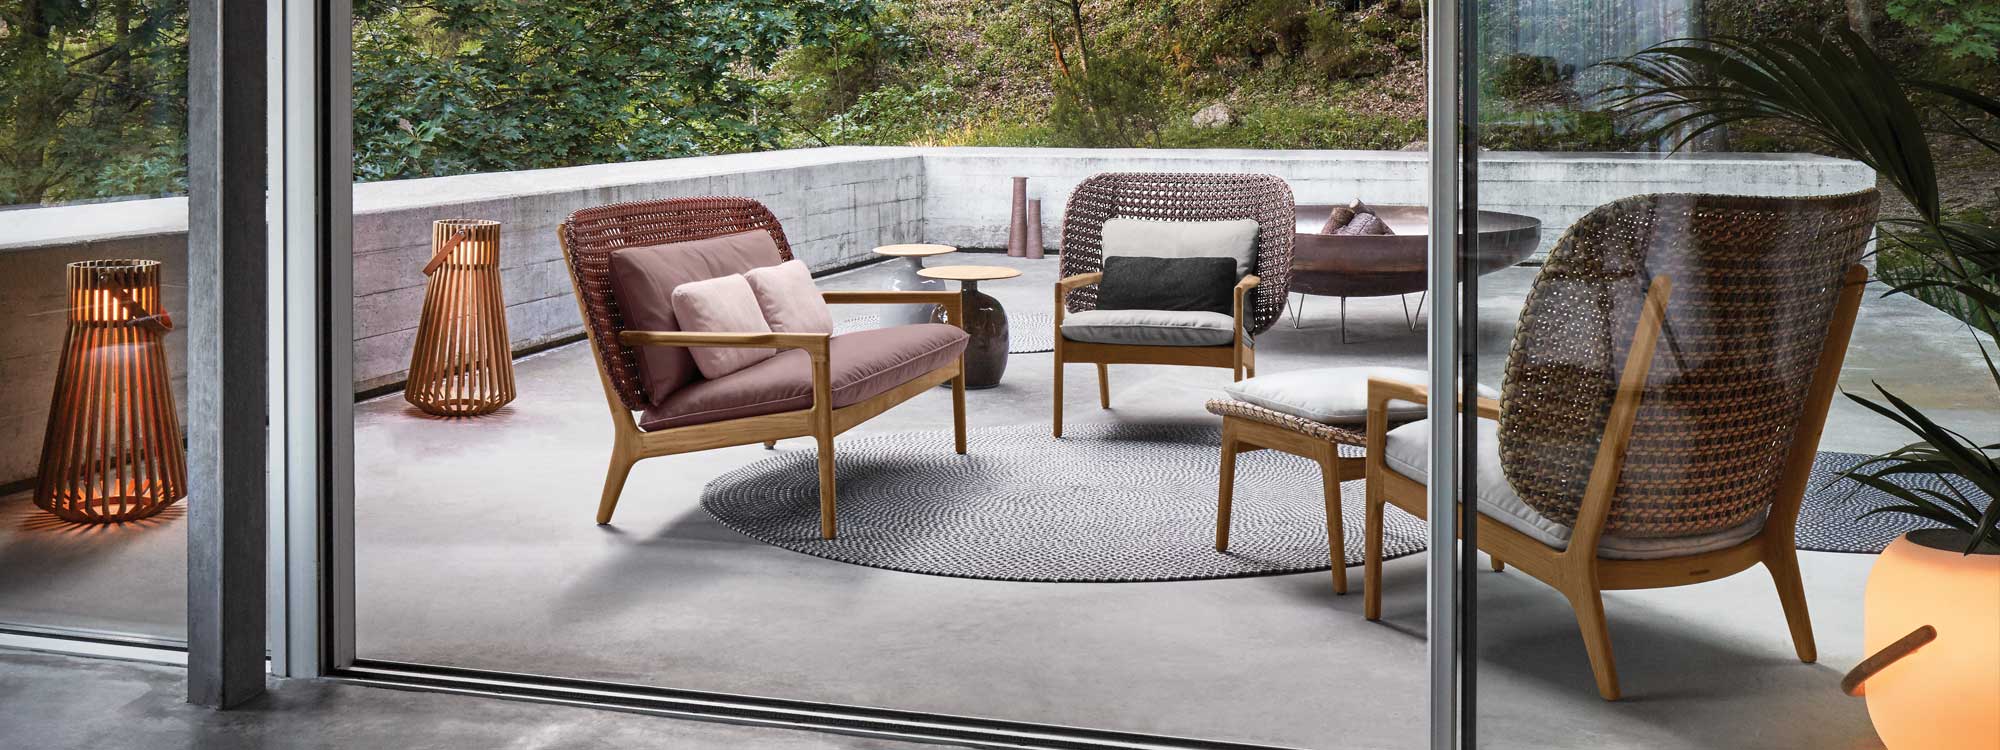 Image of Gloster Kay wicker garden sofa and lounge chairs, together with Ray lantern on terrace at dusk